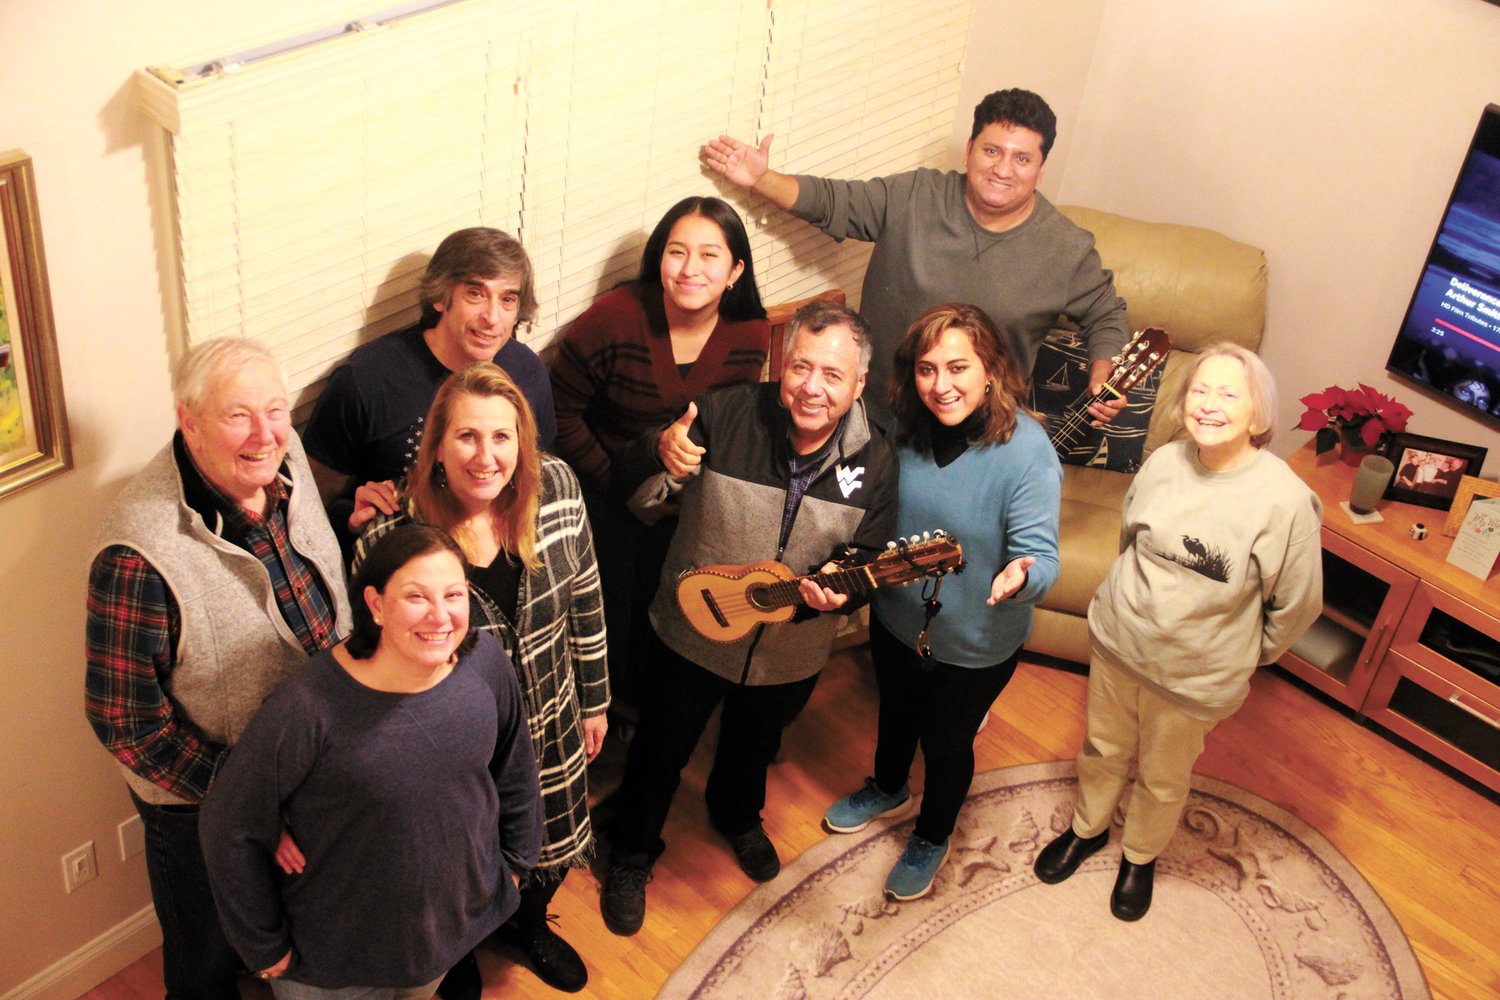 A CHORUS: Forty years after spending a year in Warwick as a member of the Rotary Club student exchange program, Alejandro Camara and members of his family returned to see his host families. Here they are pictured in the home of Gordon and Marilyn Wilmot after a sing along of popular Spanish and American songs: Gordon Wilmot, his daughters Sarah Perrone and Sue Cabeceiras, Sue’s husband Kevin, Carola, Alejandro’s granddaughter, Alejandro, his daughter Lucero, his son Cesar and Marilyn Wilmot. (Warwick Beacon photo)